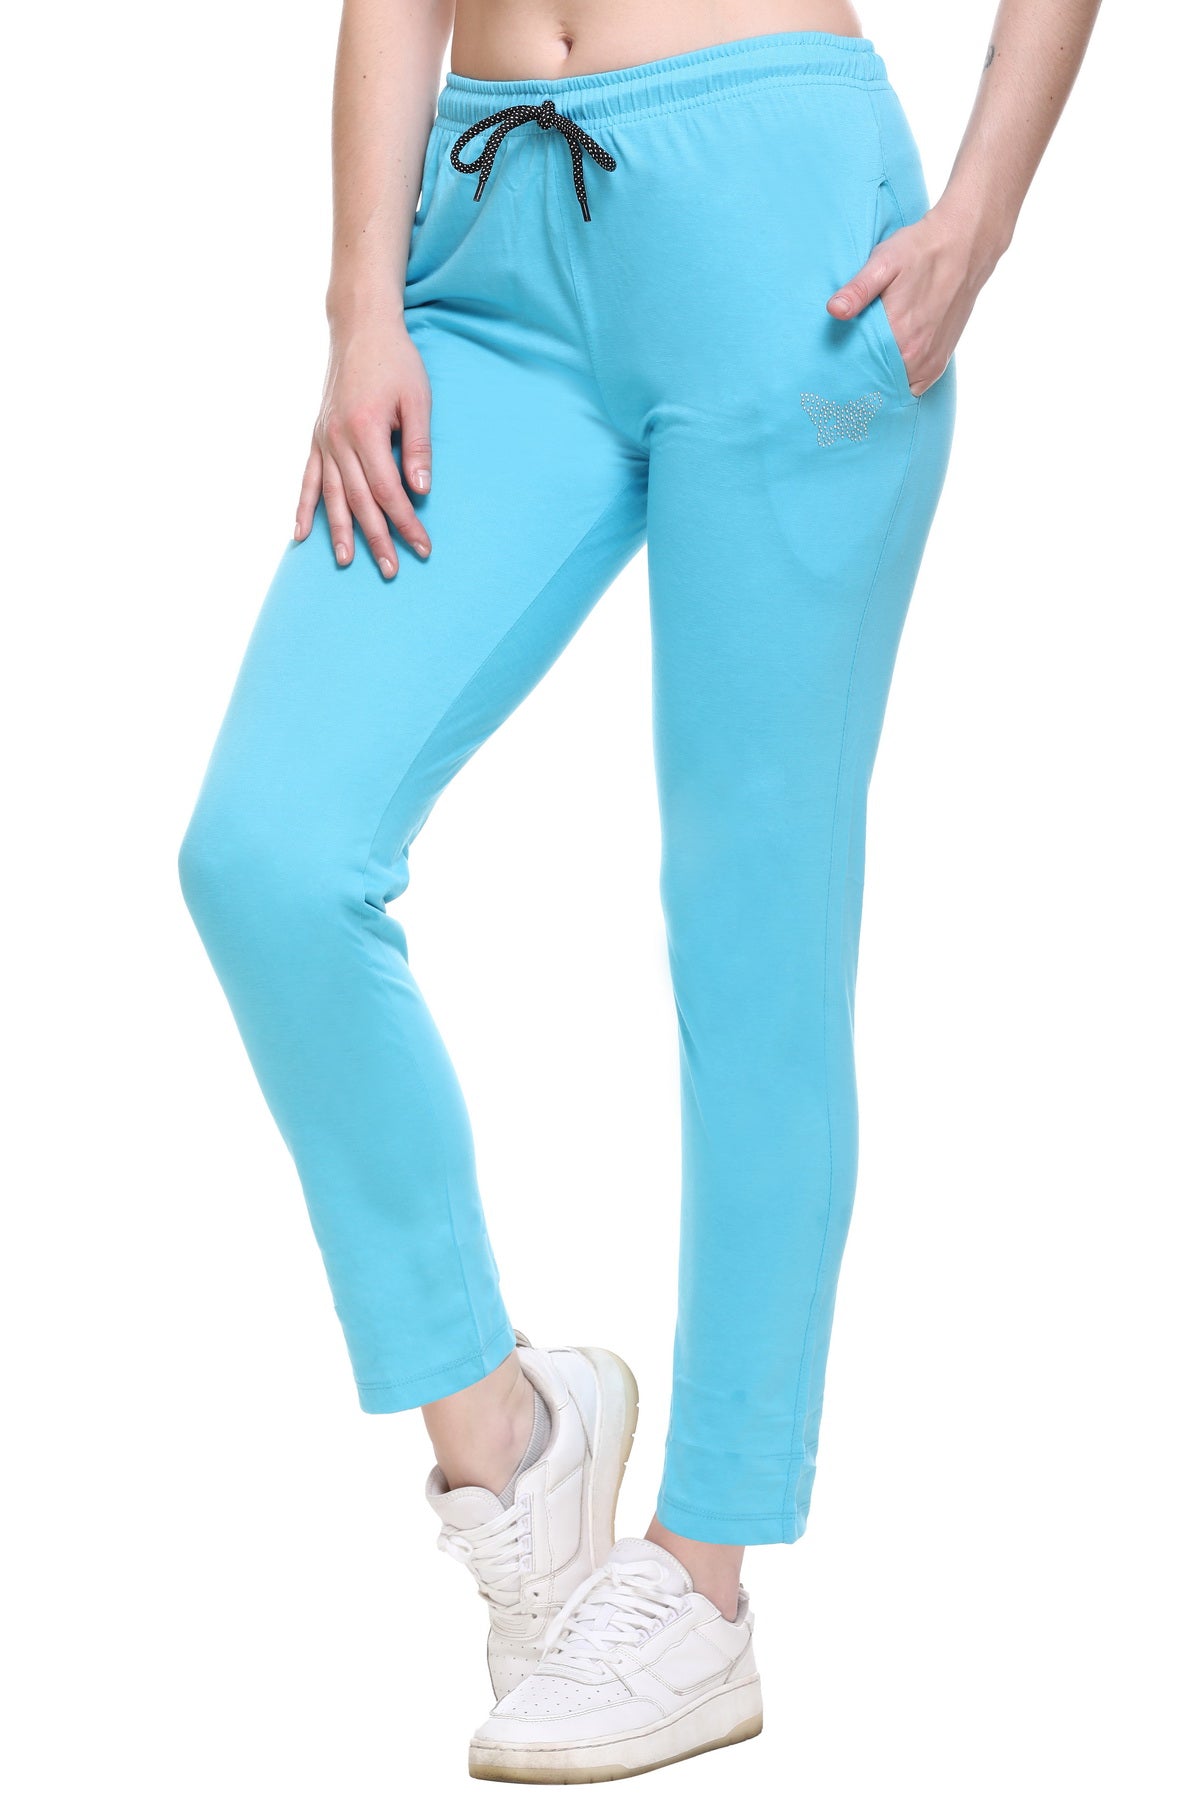 Comfy Aqua Cotton Track Pants For Women At Best Prices